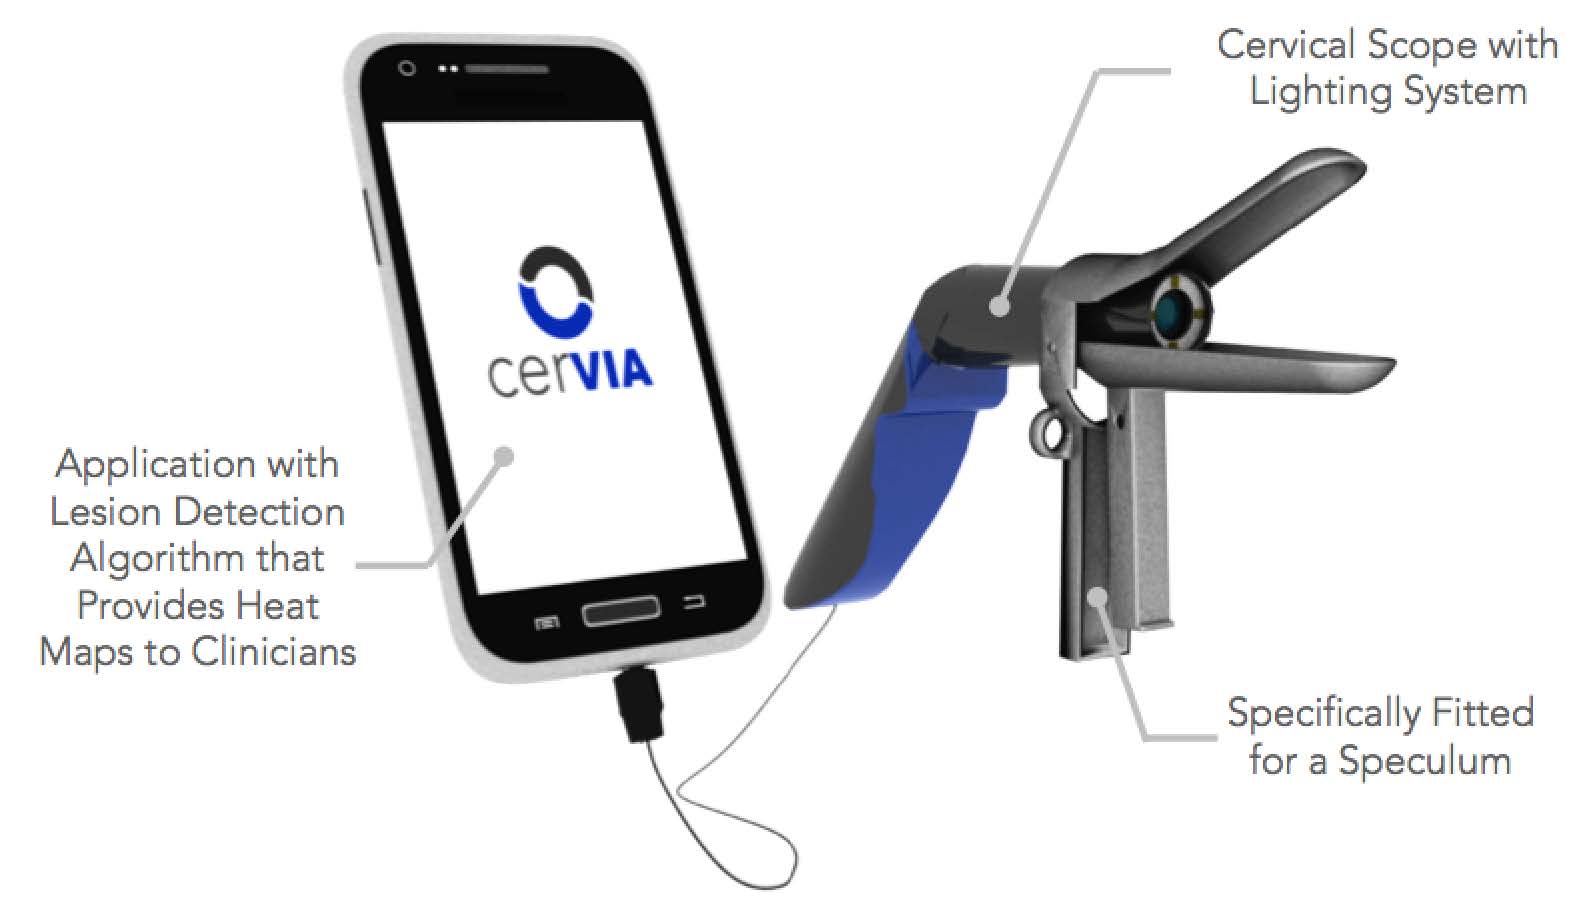 A diagram of the speculum device attached to a smart phone